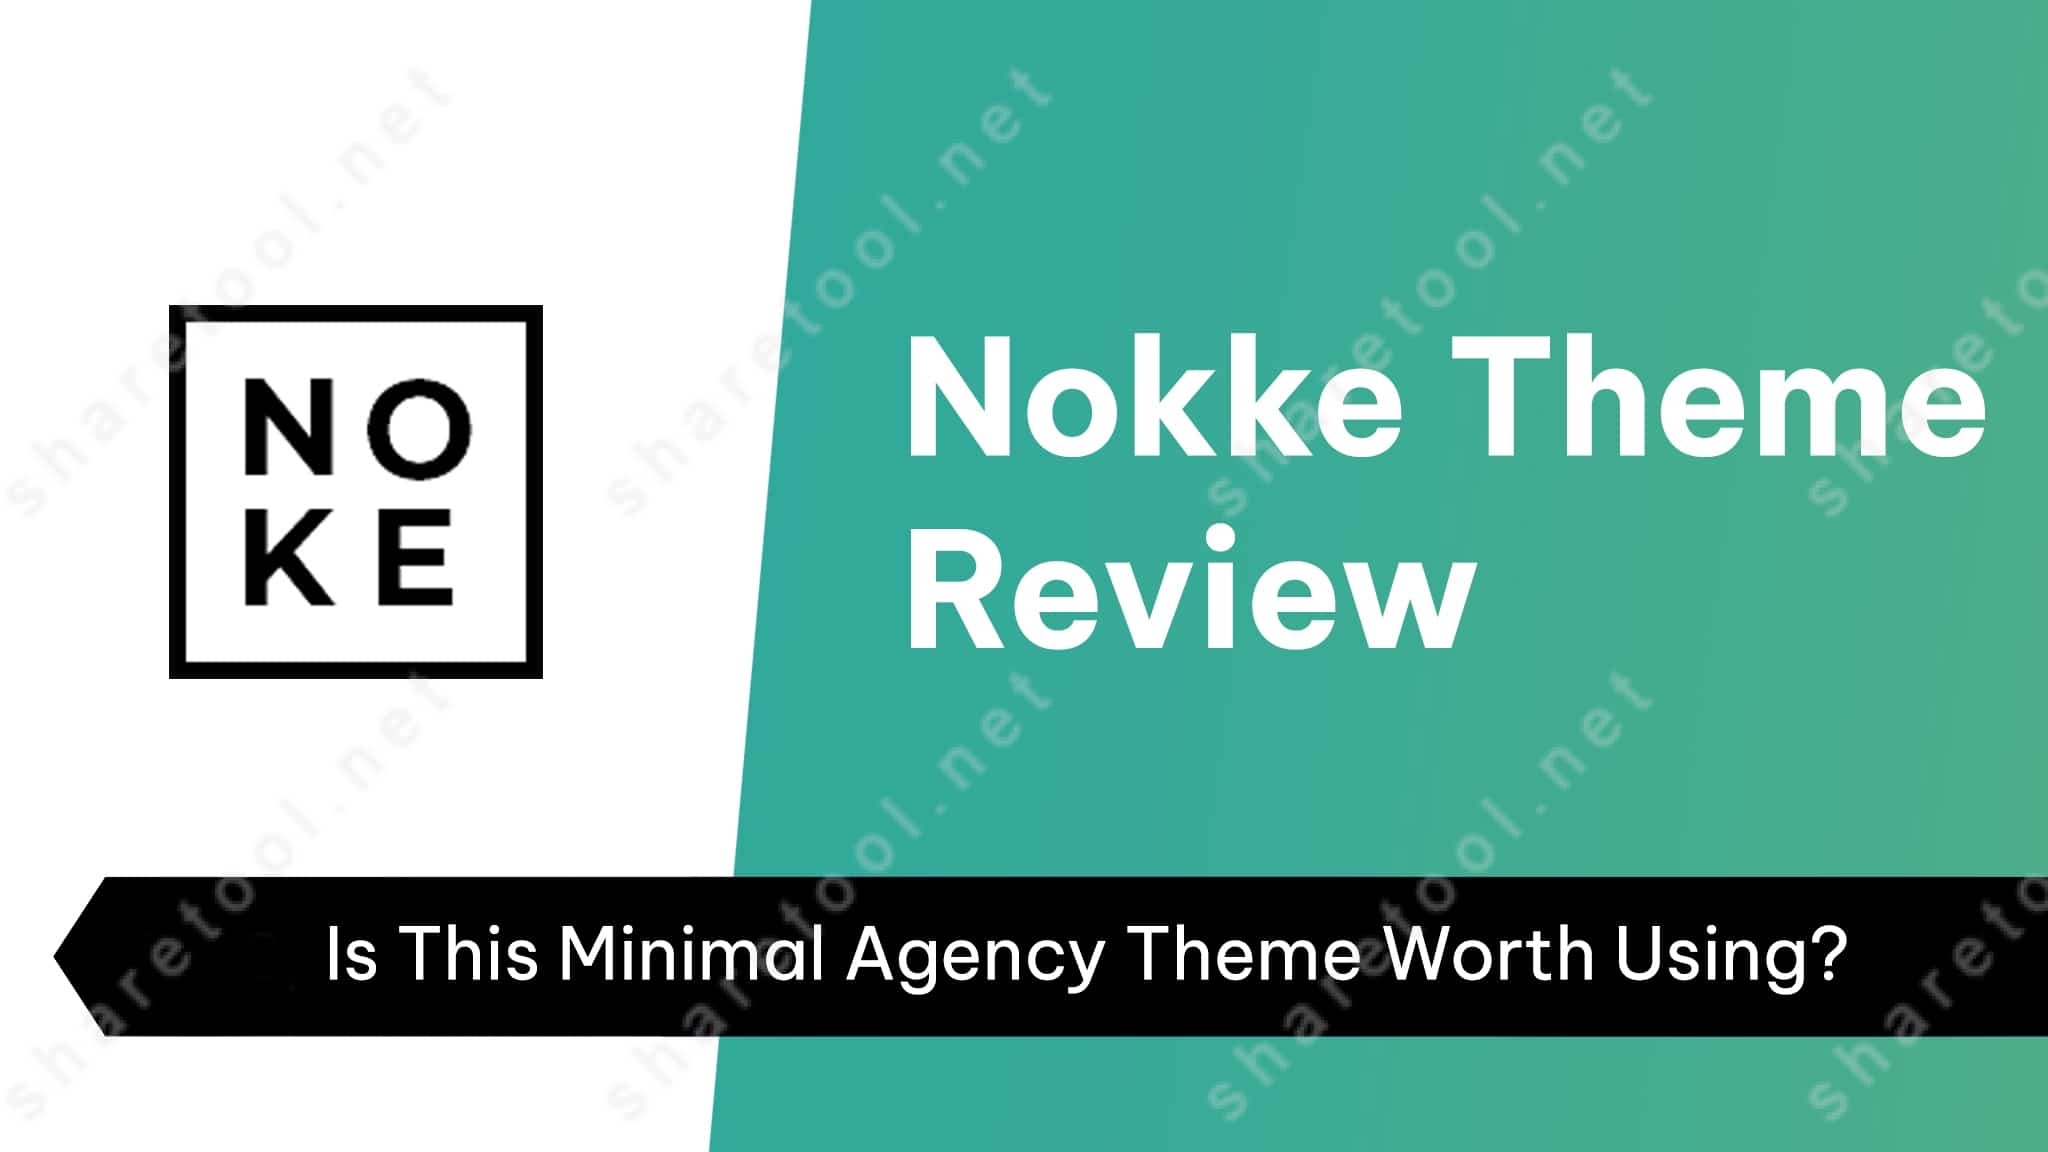 Nokke Theme Review